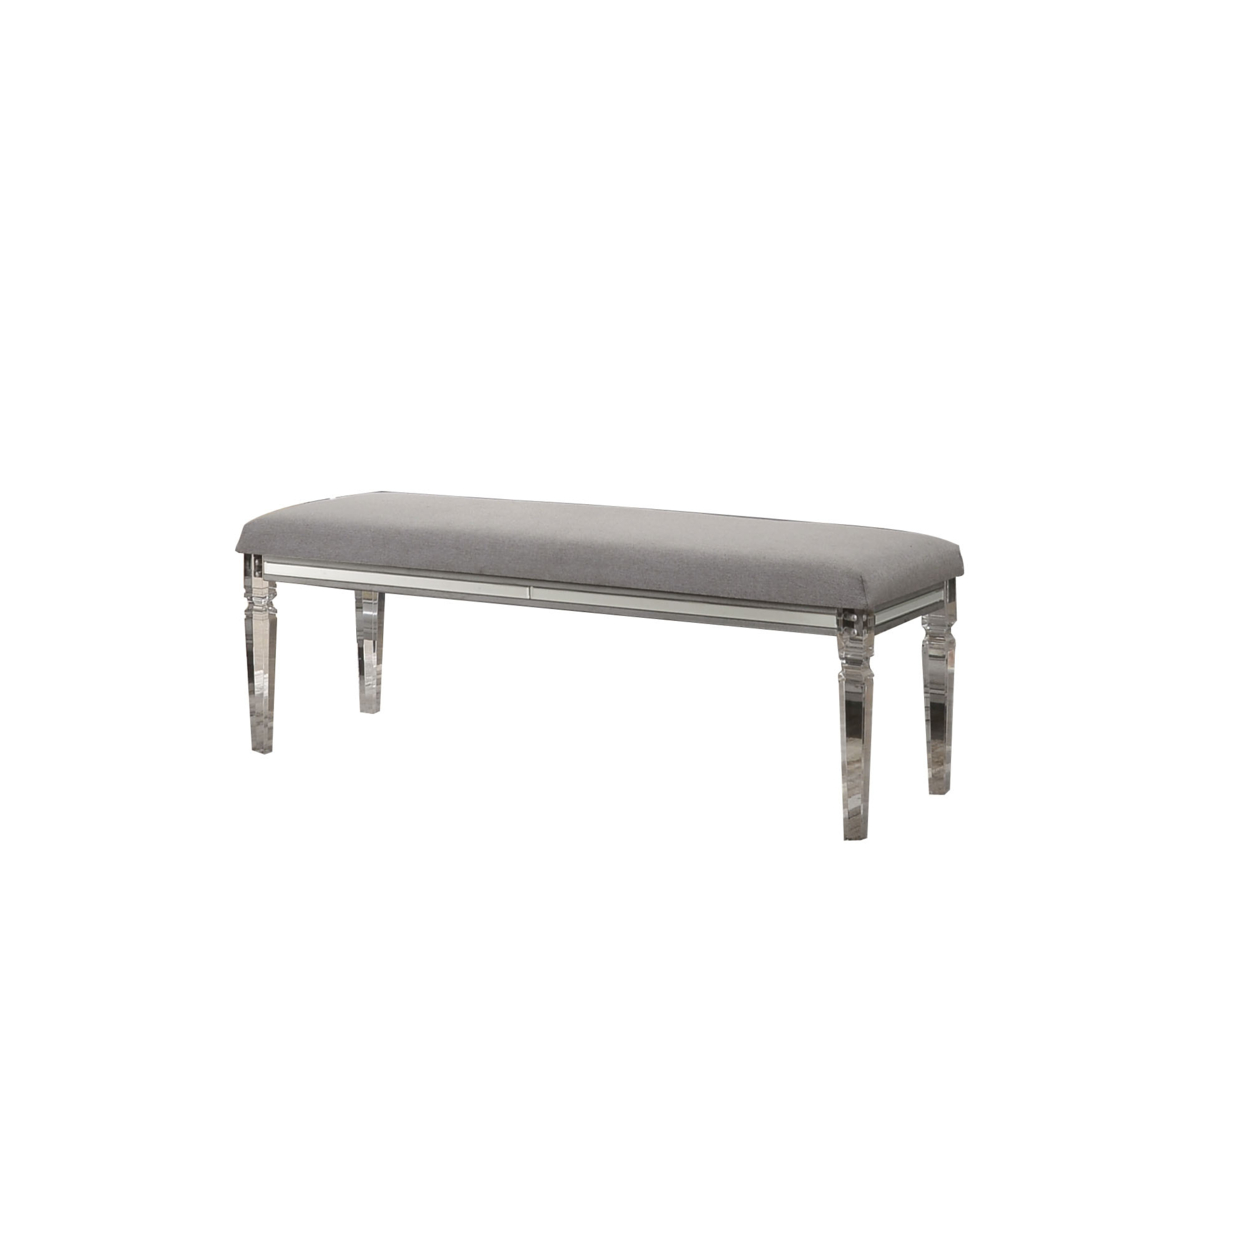 Fabric Upholstered Bench With Acrylic Legs And Silver Accents, Gray- Saltoro Sherpi